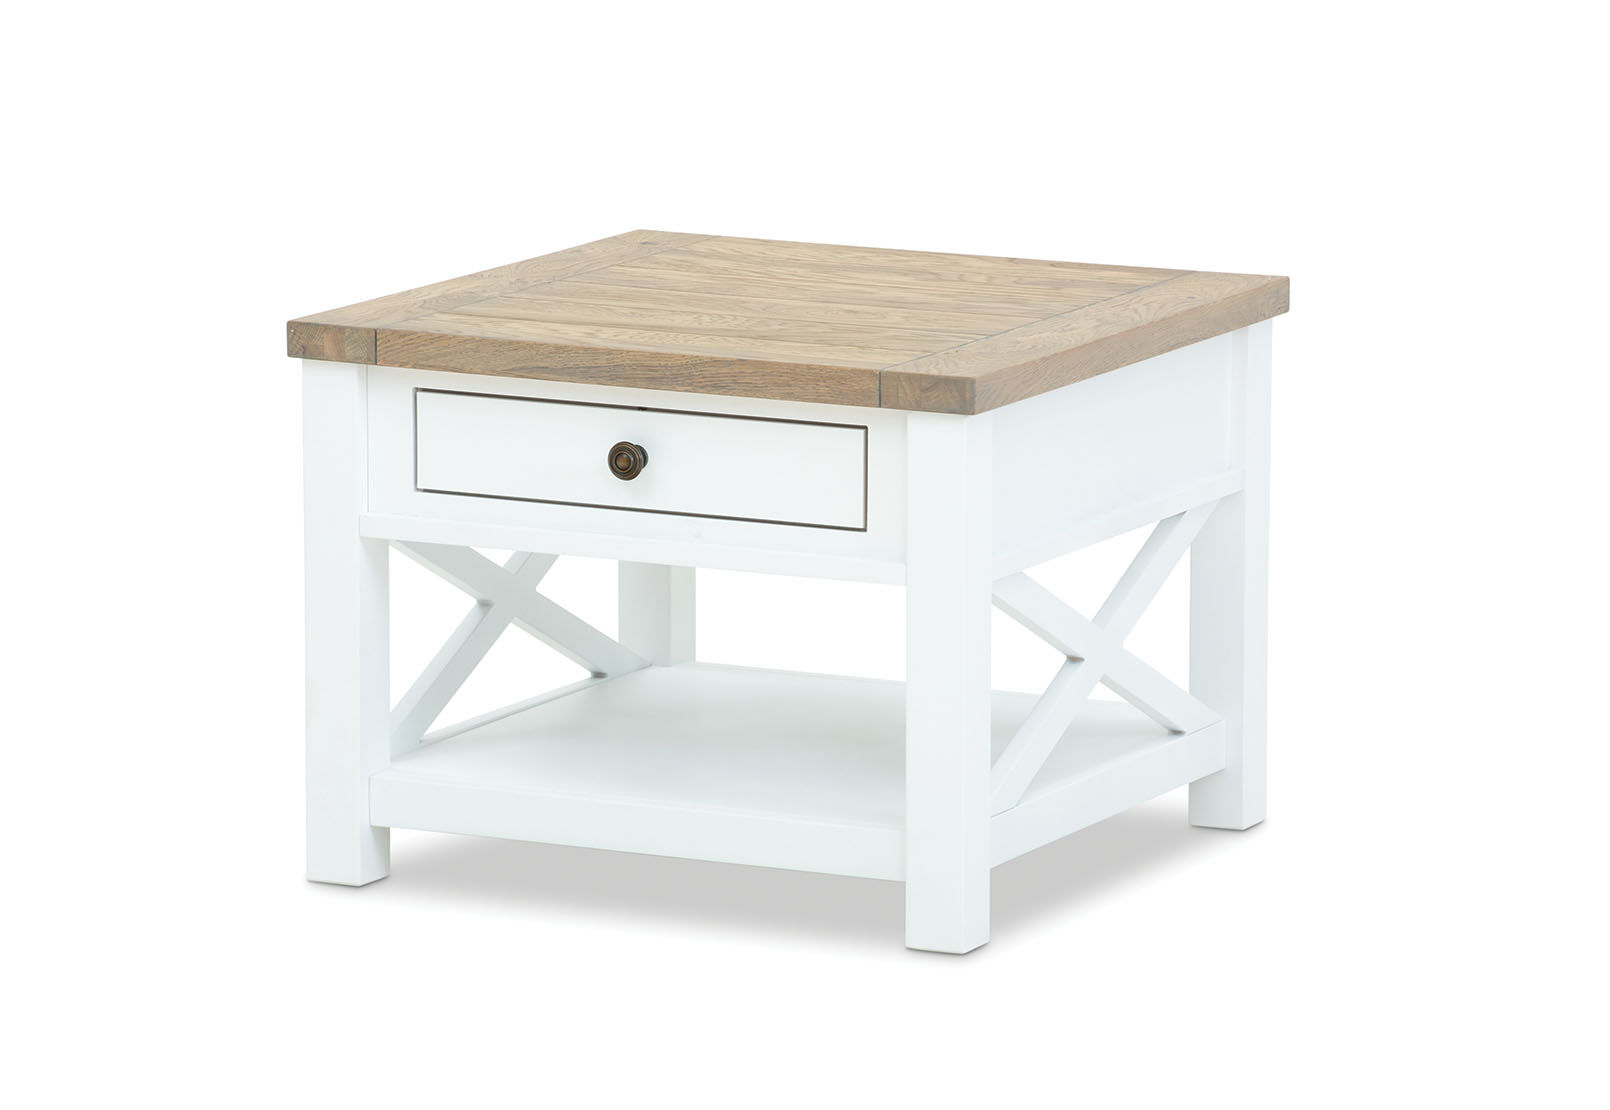 Oak Normandy Lamp Table Amart Furniture, White Lamp Table With Storage